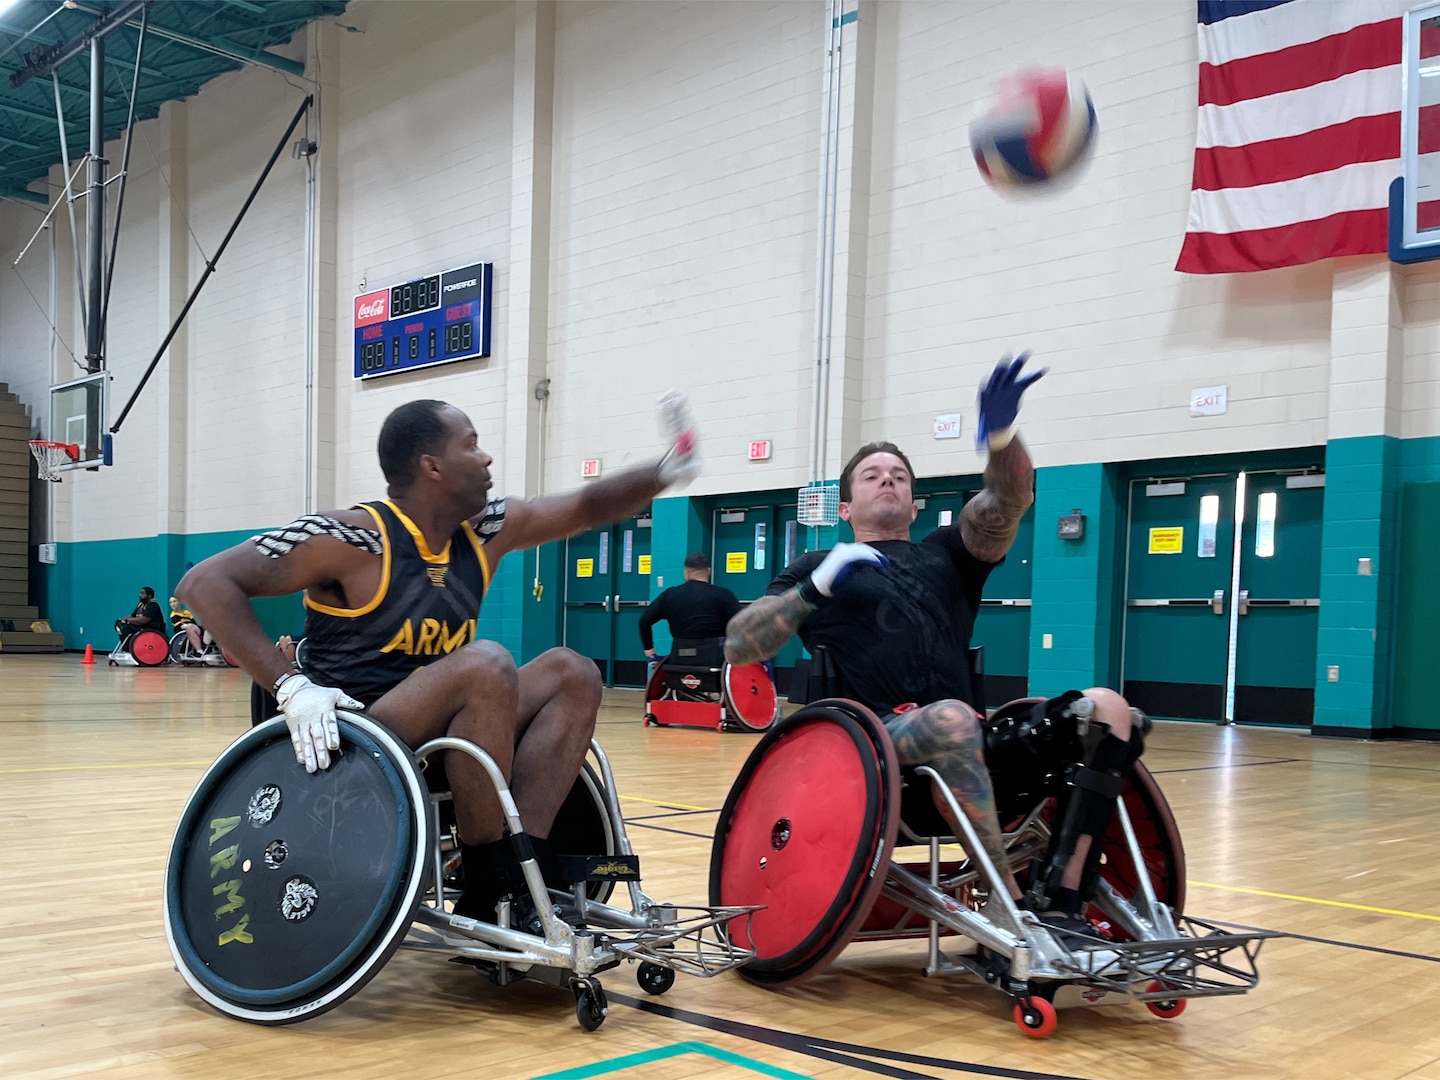 Master Sgt. Micheal Haley makes a pass while Staff Sgt. Derrick Thompson goes for a block during wheelchair rugby practice May 23 at Fort Stewart’s Newman Fitness Center. Eighteen rugby athletes, part of a 40-Soldier team, practiced at Fort Stewart before competing for the Army in the DoD Warrior Games June 21-30 in Orlando, Florida. Winn Army Community Hospital’s Soldier Recovery Unit sponsored the Army team for an Army Sports Team Camp, part of the Army Recovery Care Program. The weeklong camp ended May 24 and included practices for other adaptive team sports as well as learning sessions about mobility, nutrition and sports psychology.